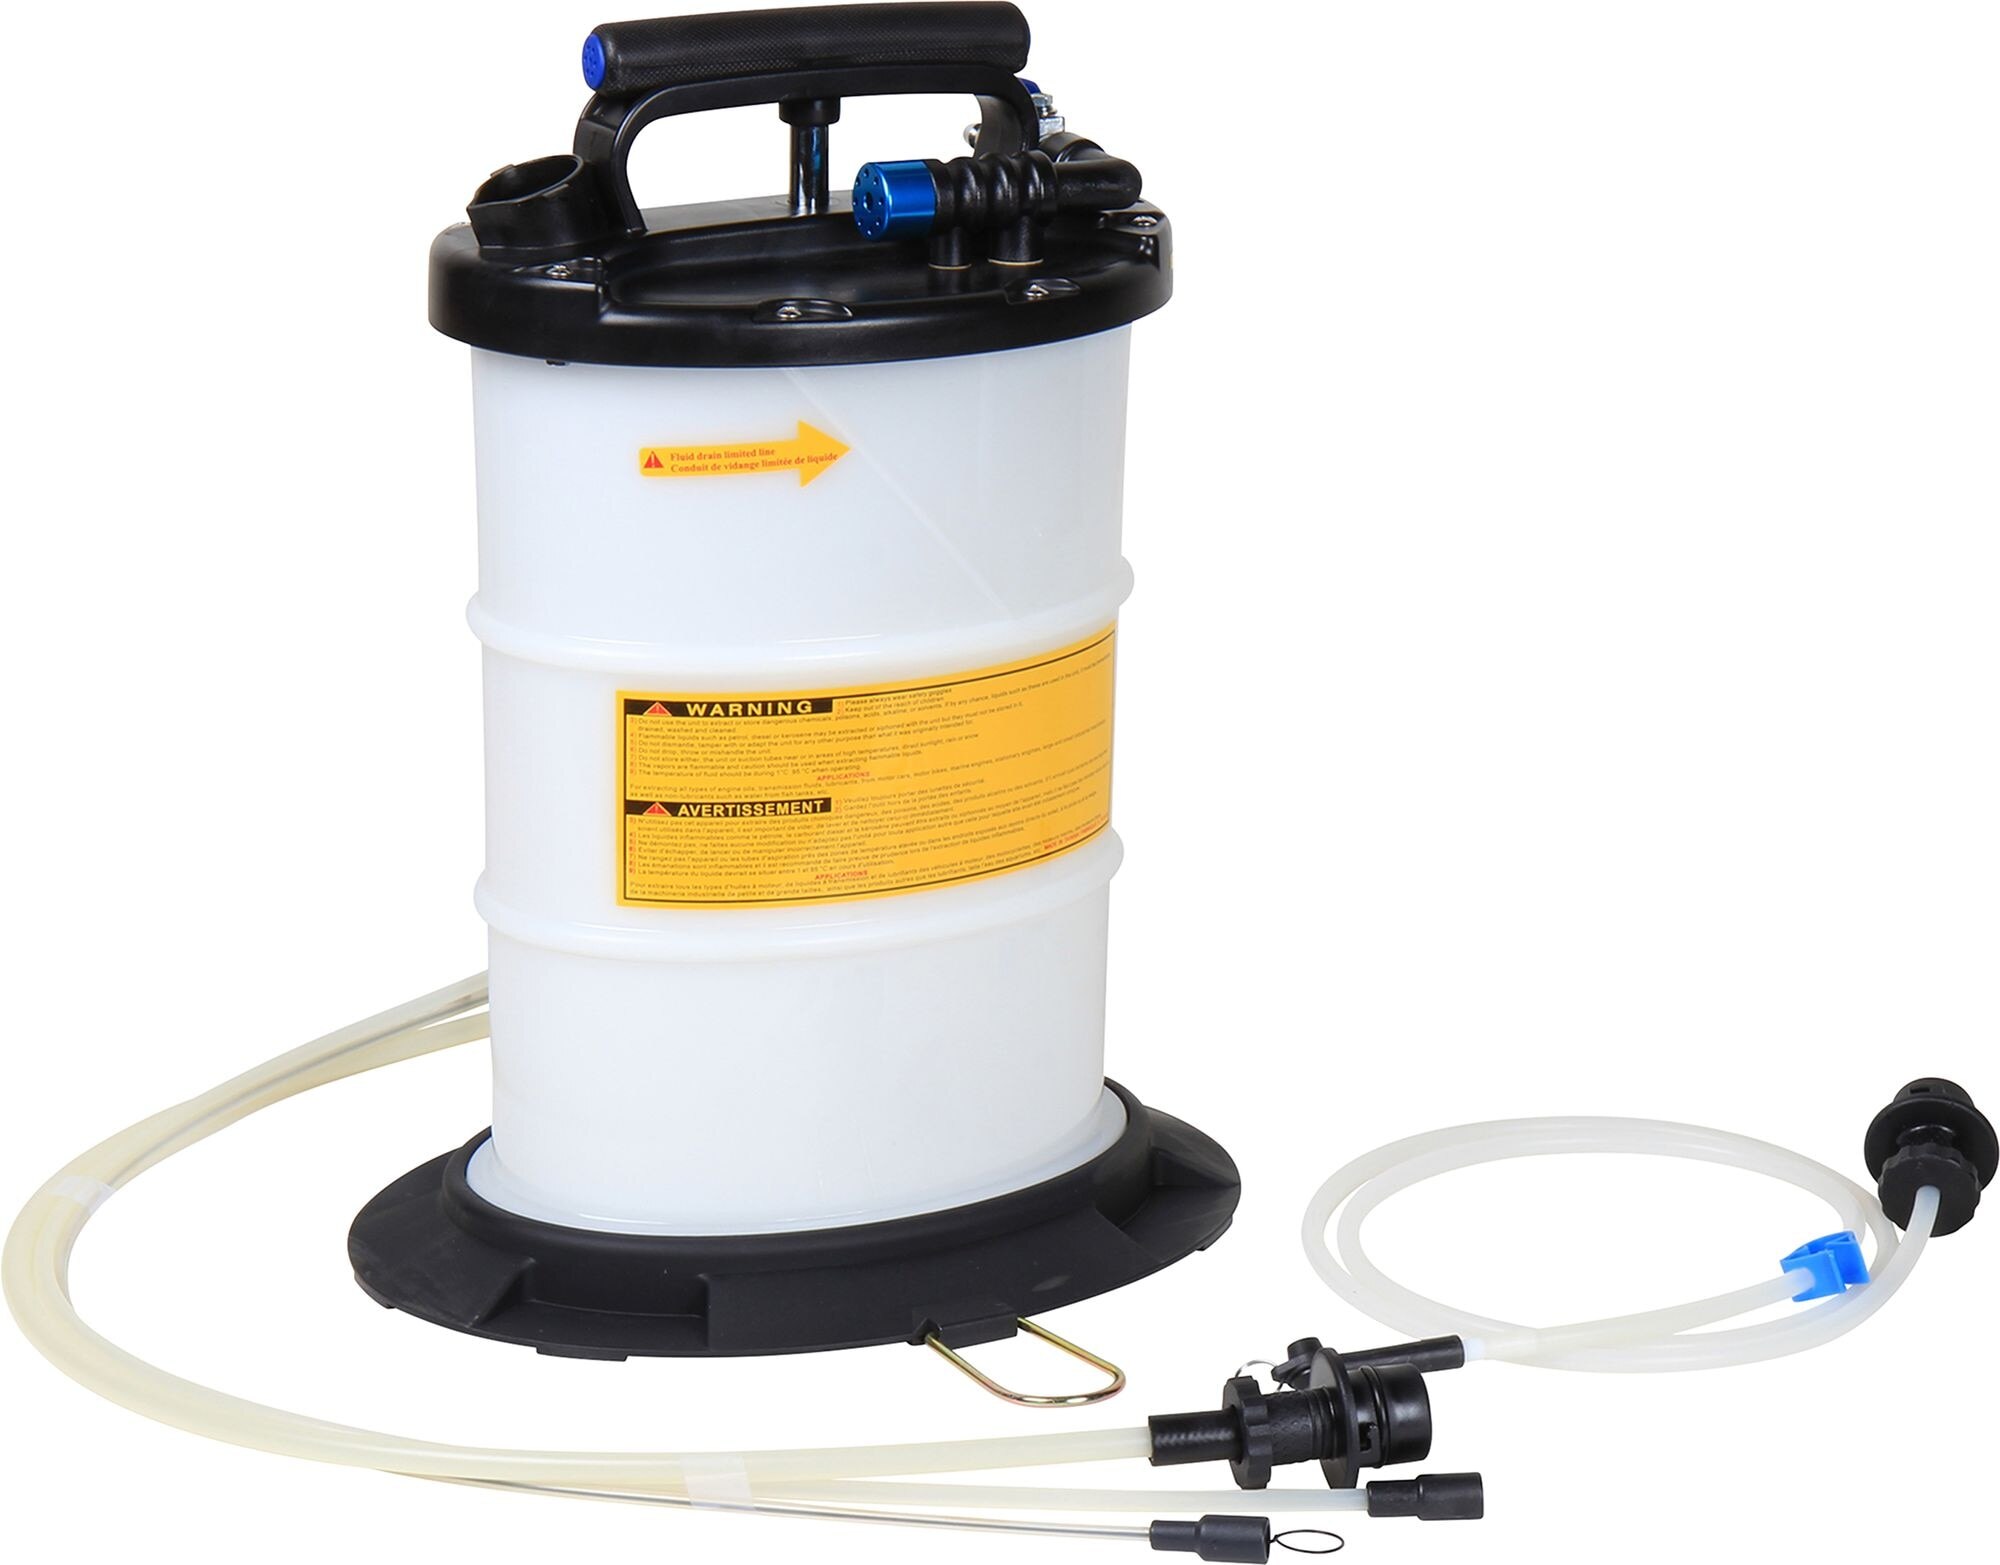 Manual/Pneumatic Fluid Extractor 10L Capacity Powerful Suction Action with Included Hand Pump or Pneumatic System ARES 15032 Oil and Chemical-Resistant Polypropylene Construction 